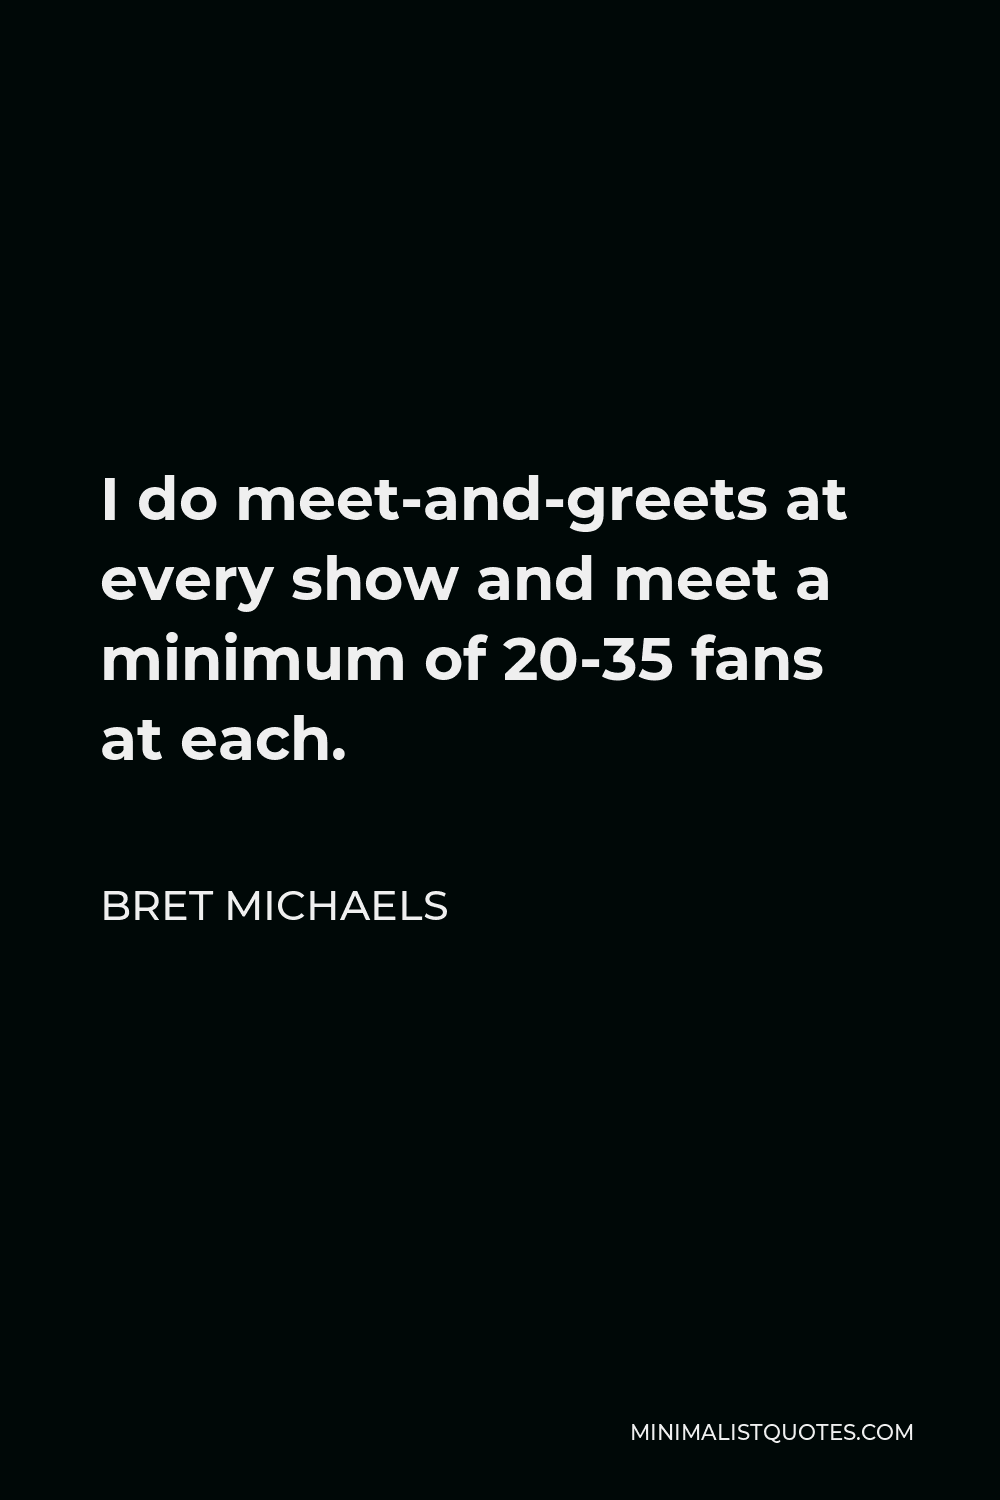 Bret Michaels Quote - I do meet-and-greets at every show and meet a minimum of 20-35 fans at each.